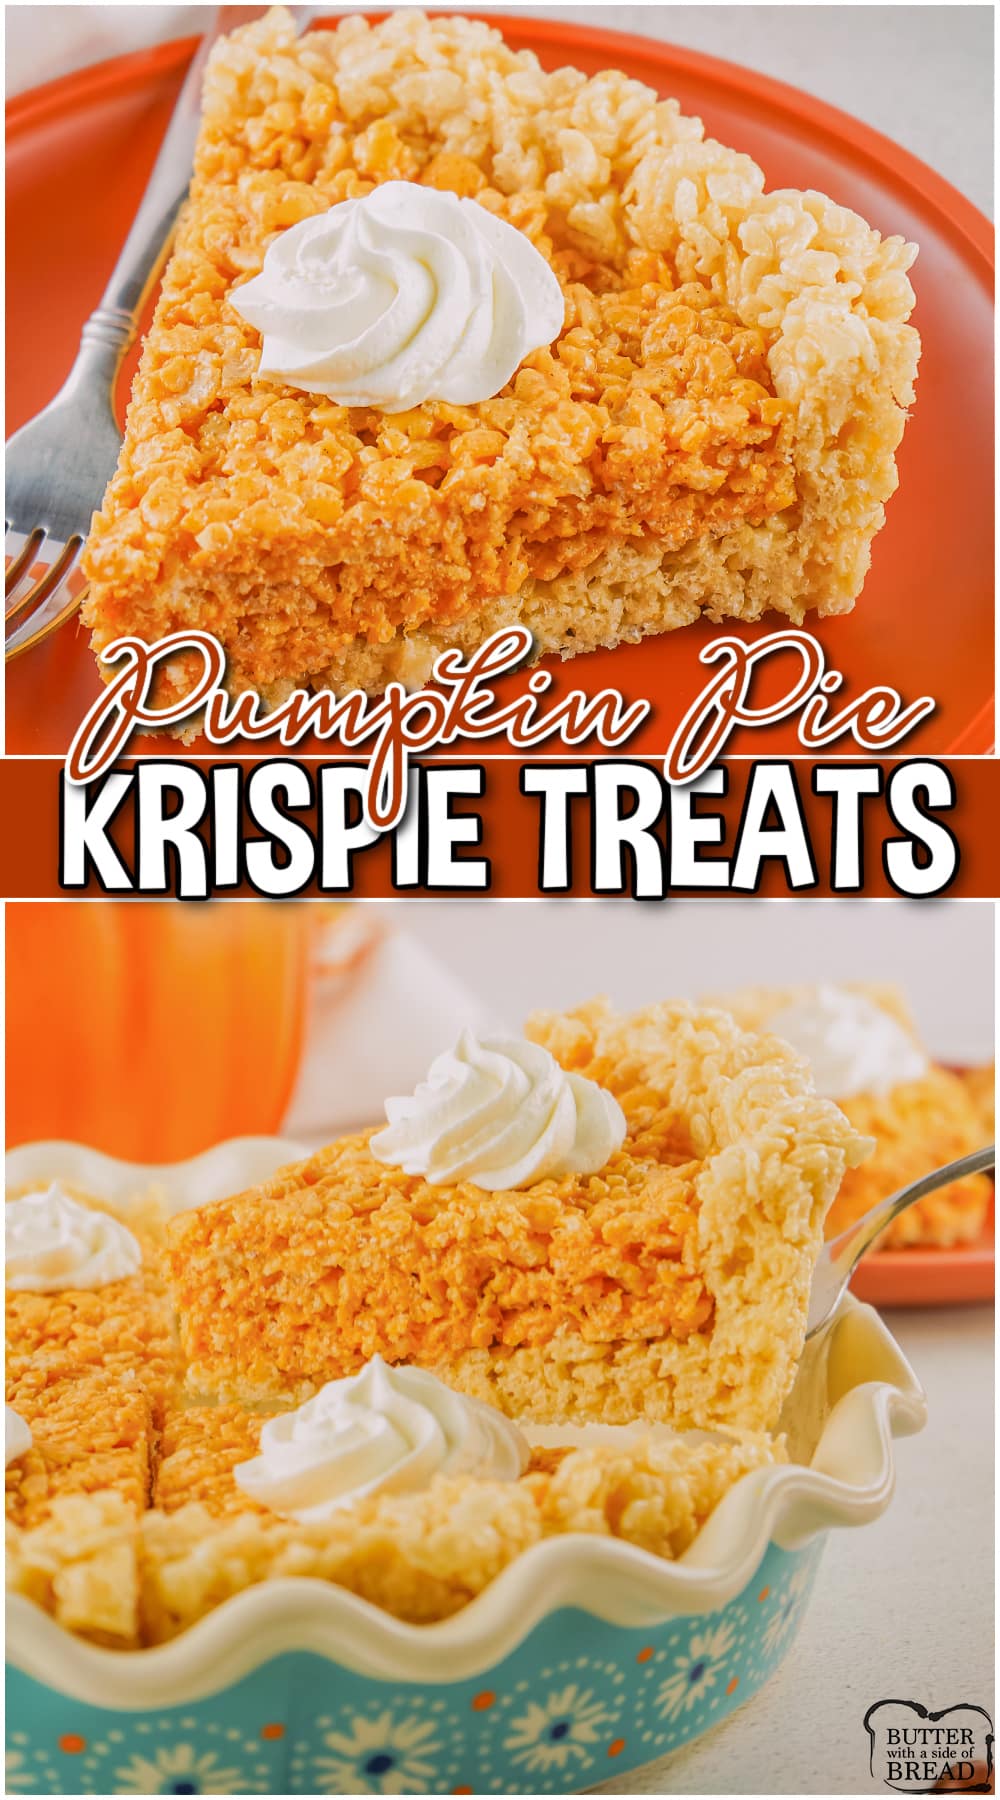 Pumpkin Pie Krispie Treats are a festive addition to your Thanksgiving feast! These rice krispie pumpkin treats are a deliciously spiced with pumpkin flavor we all love!